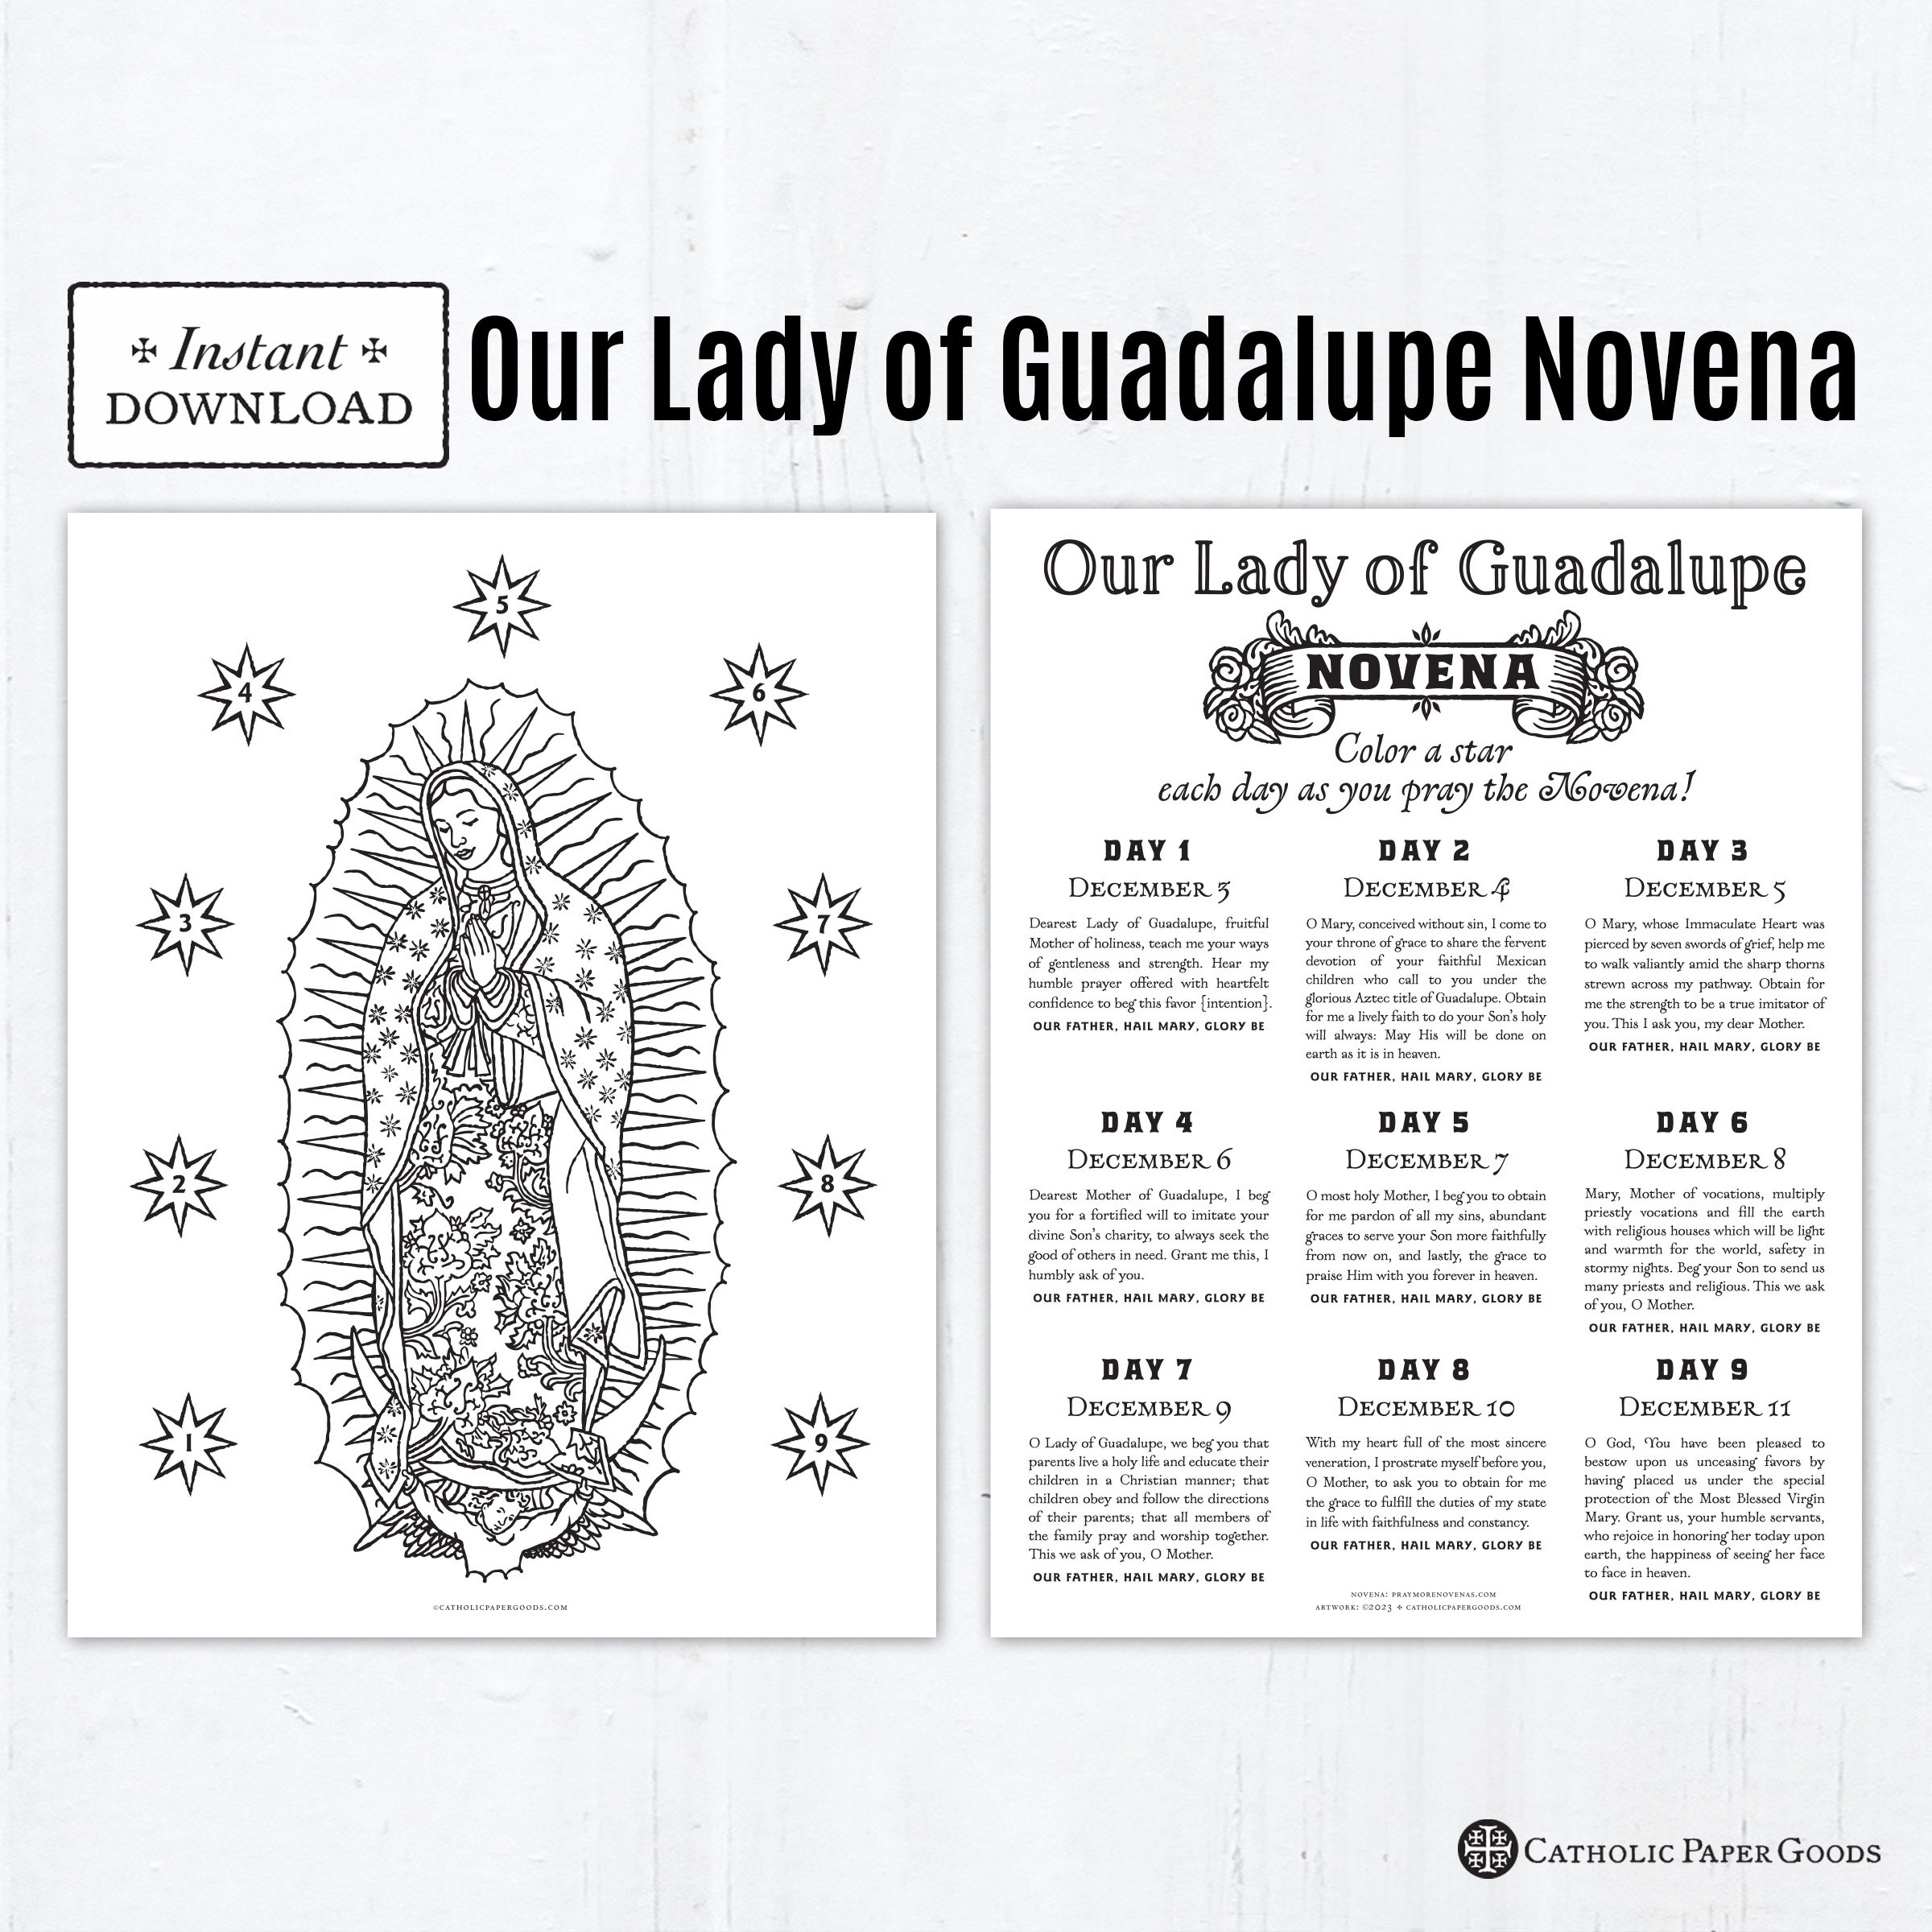 Our lady of guadalupe novena catholic coloring page and prayers printable coloring pages digital pdf